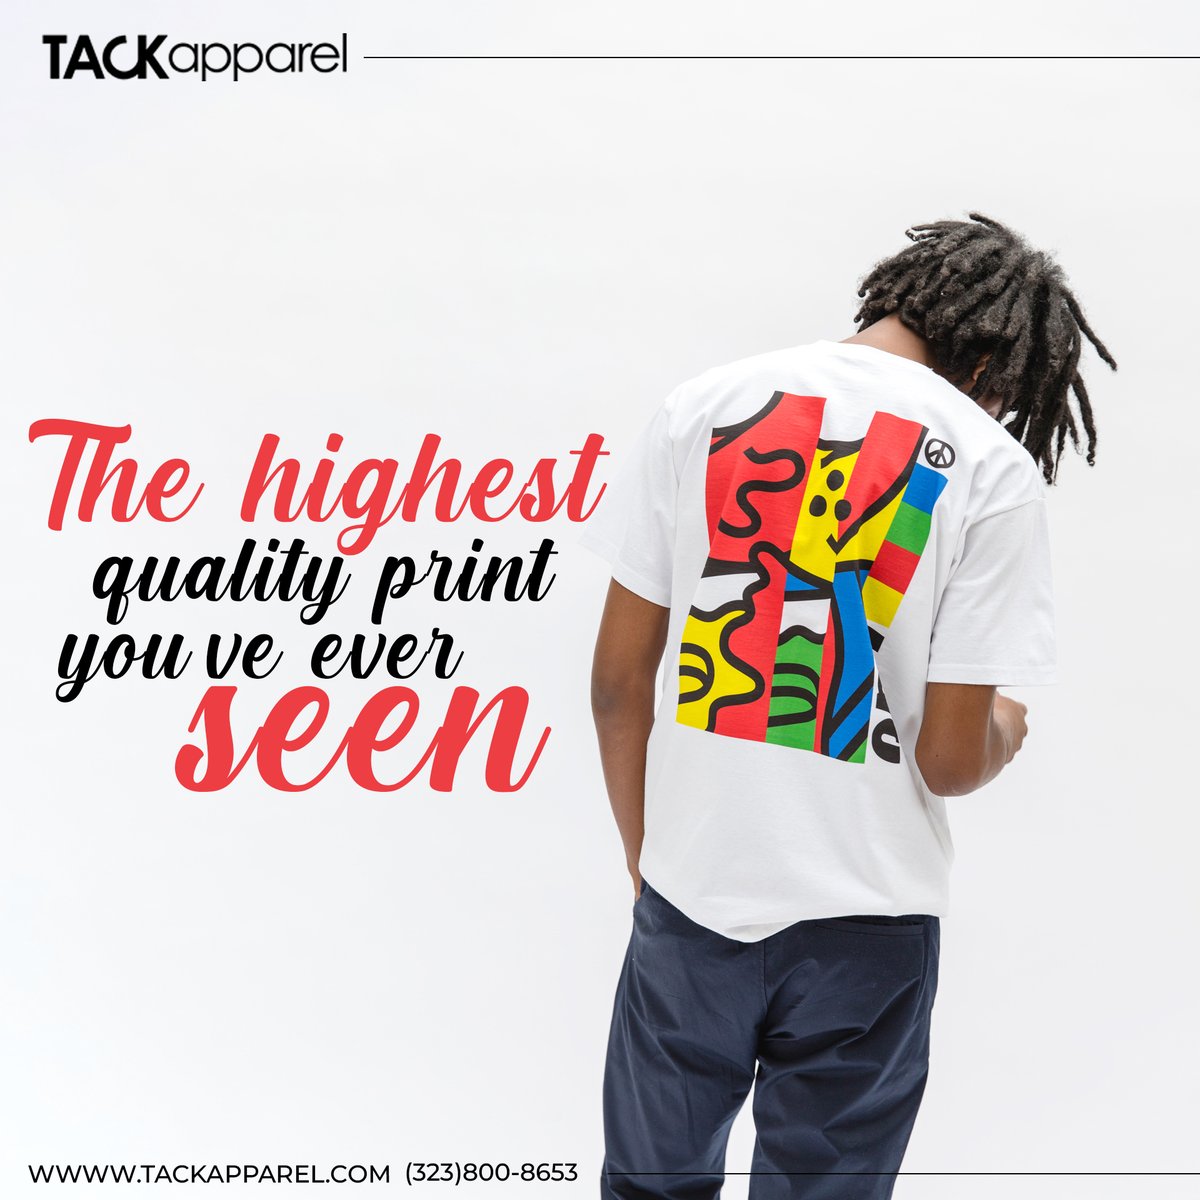 For a stylish transition into the new season, we offer printed t-shirts.

#Tackapparel #fashion #summer #apparel #style #shirtmanufacturer #customshirt #custompants